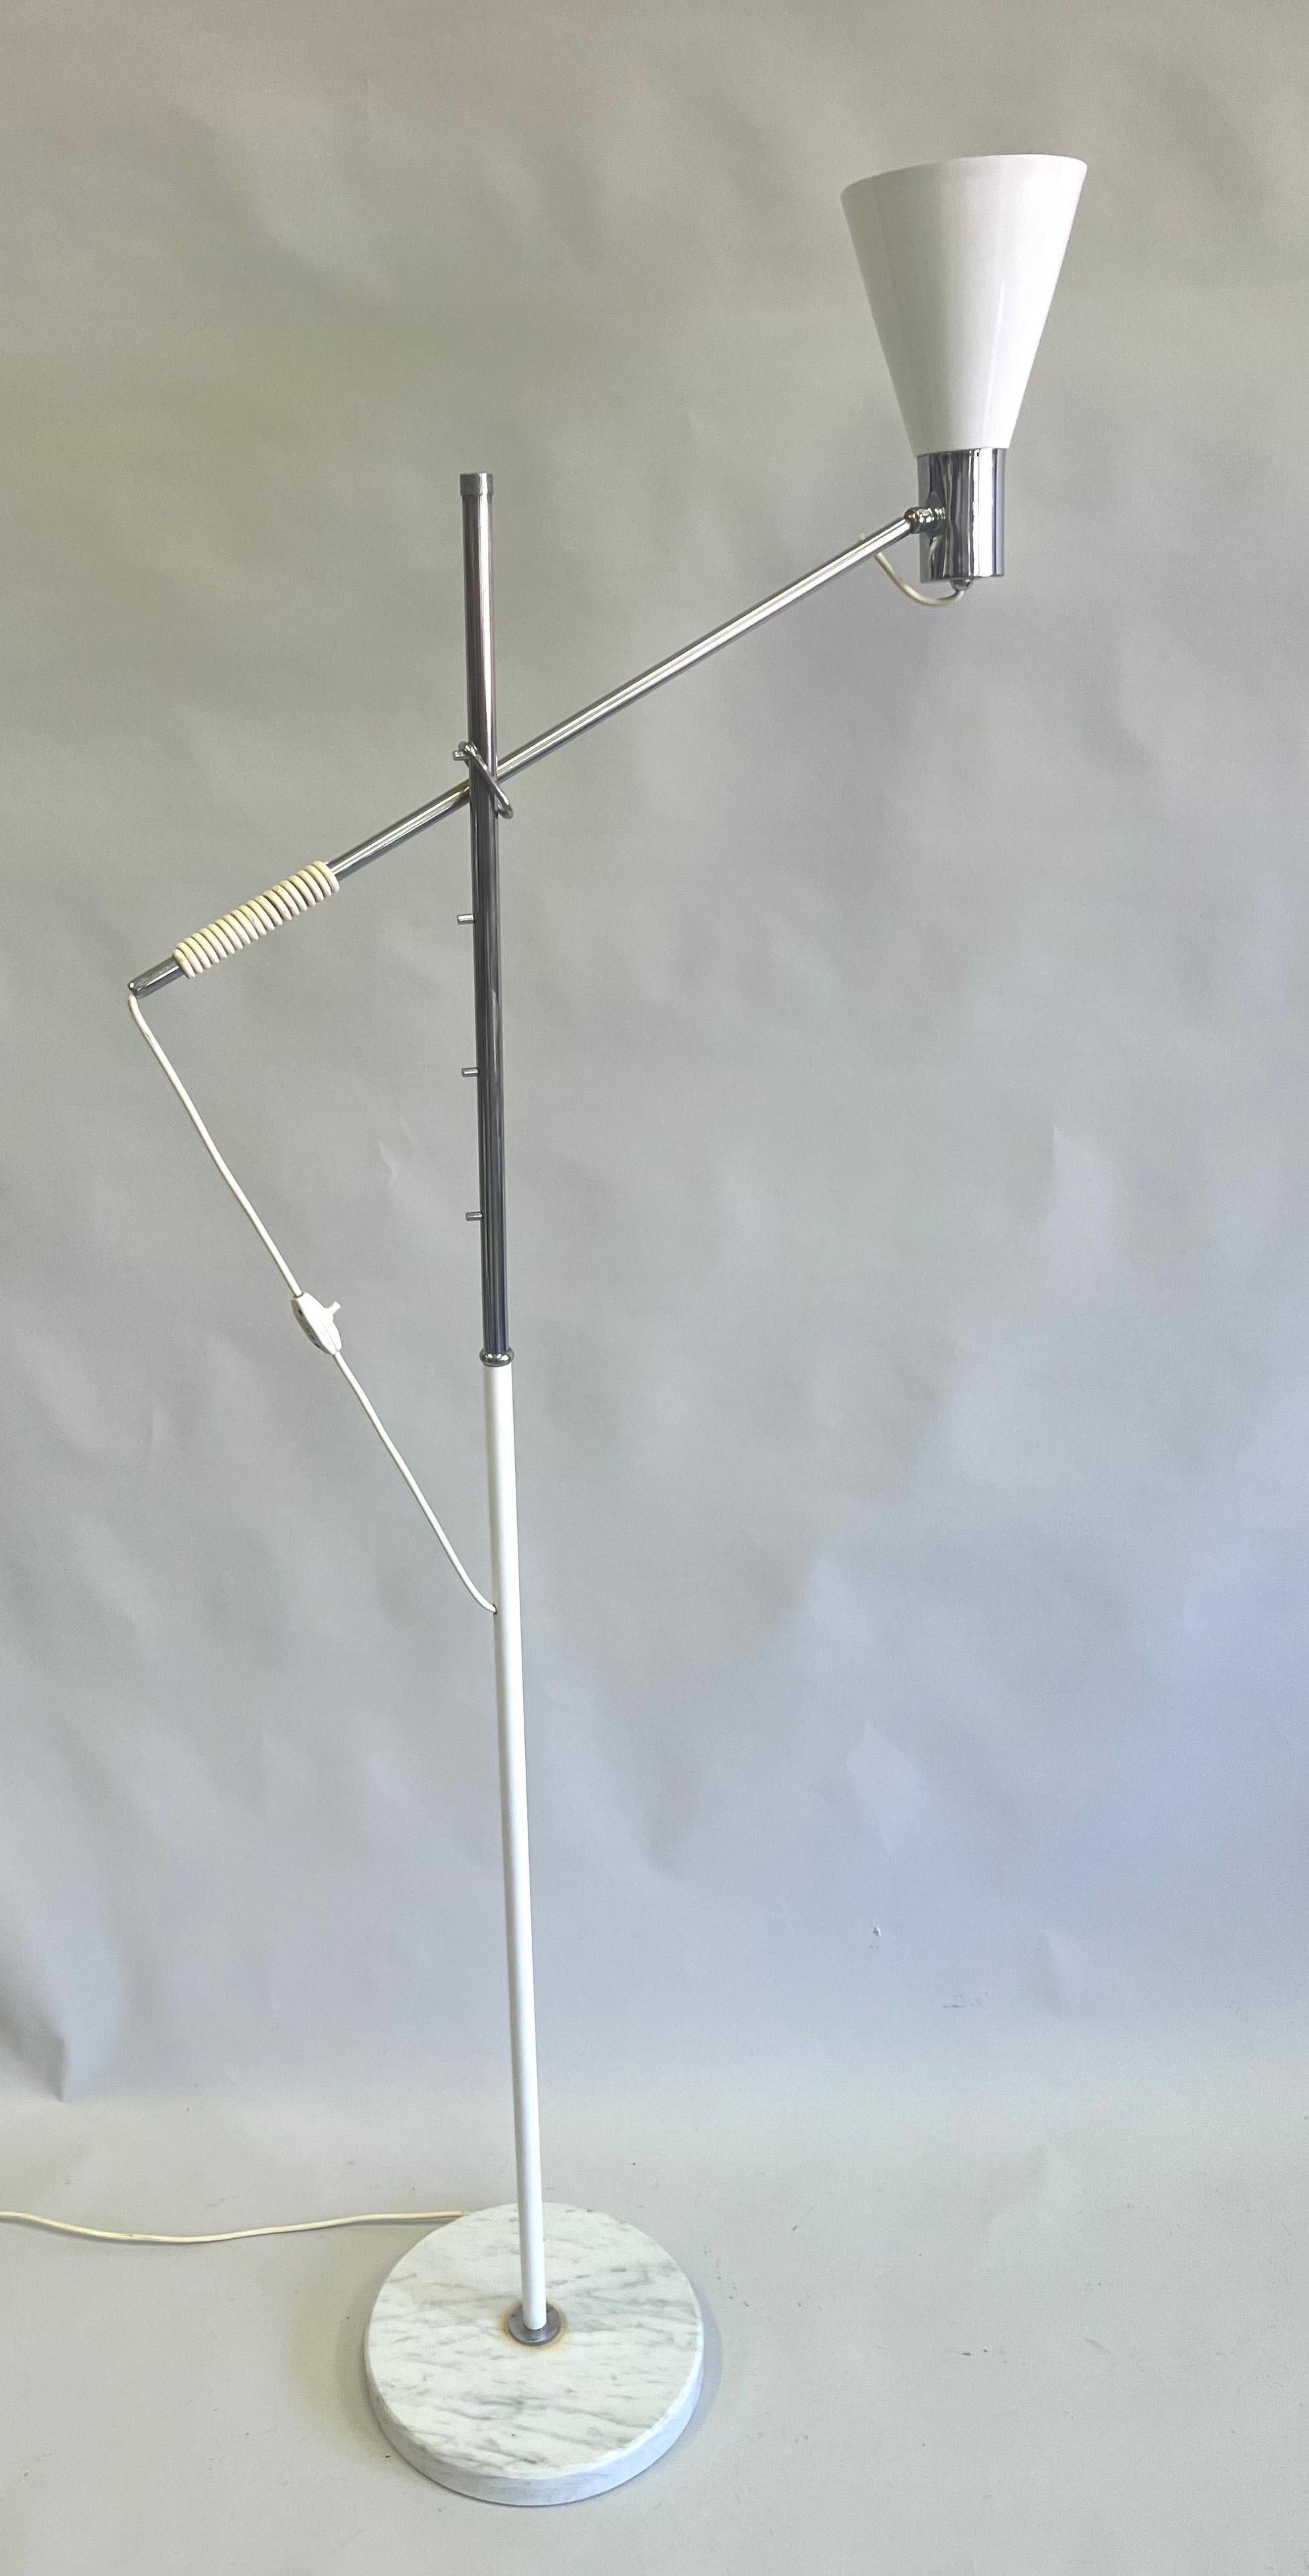 A Rare Model Italian Mid-century Modern Cantilevered Floor Lamp, attributed to Angelo Lelli and Arredoluce,  exhibiting innovative engineering, craftsmanship and aesthetics. The standing lamp features a single cantilevered arm supported by a unique